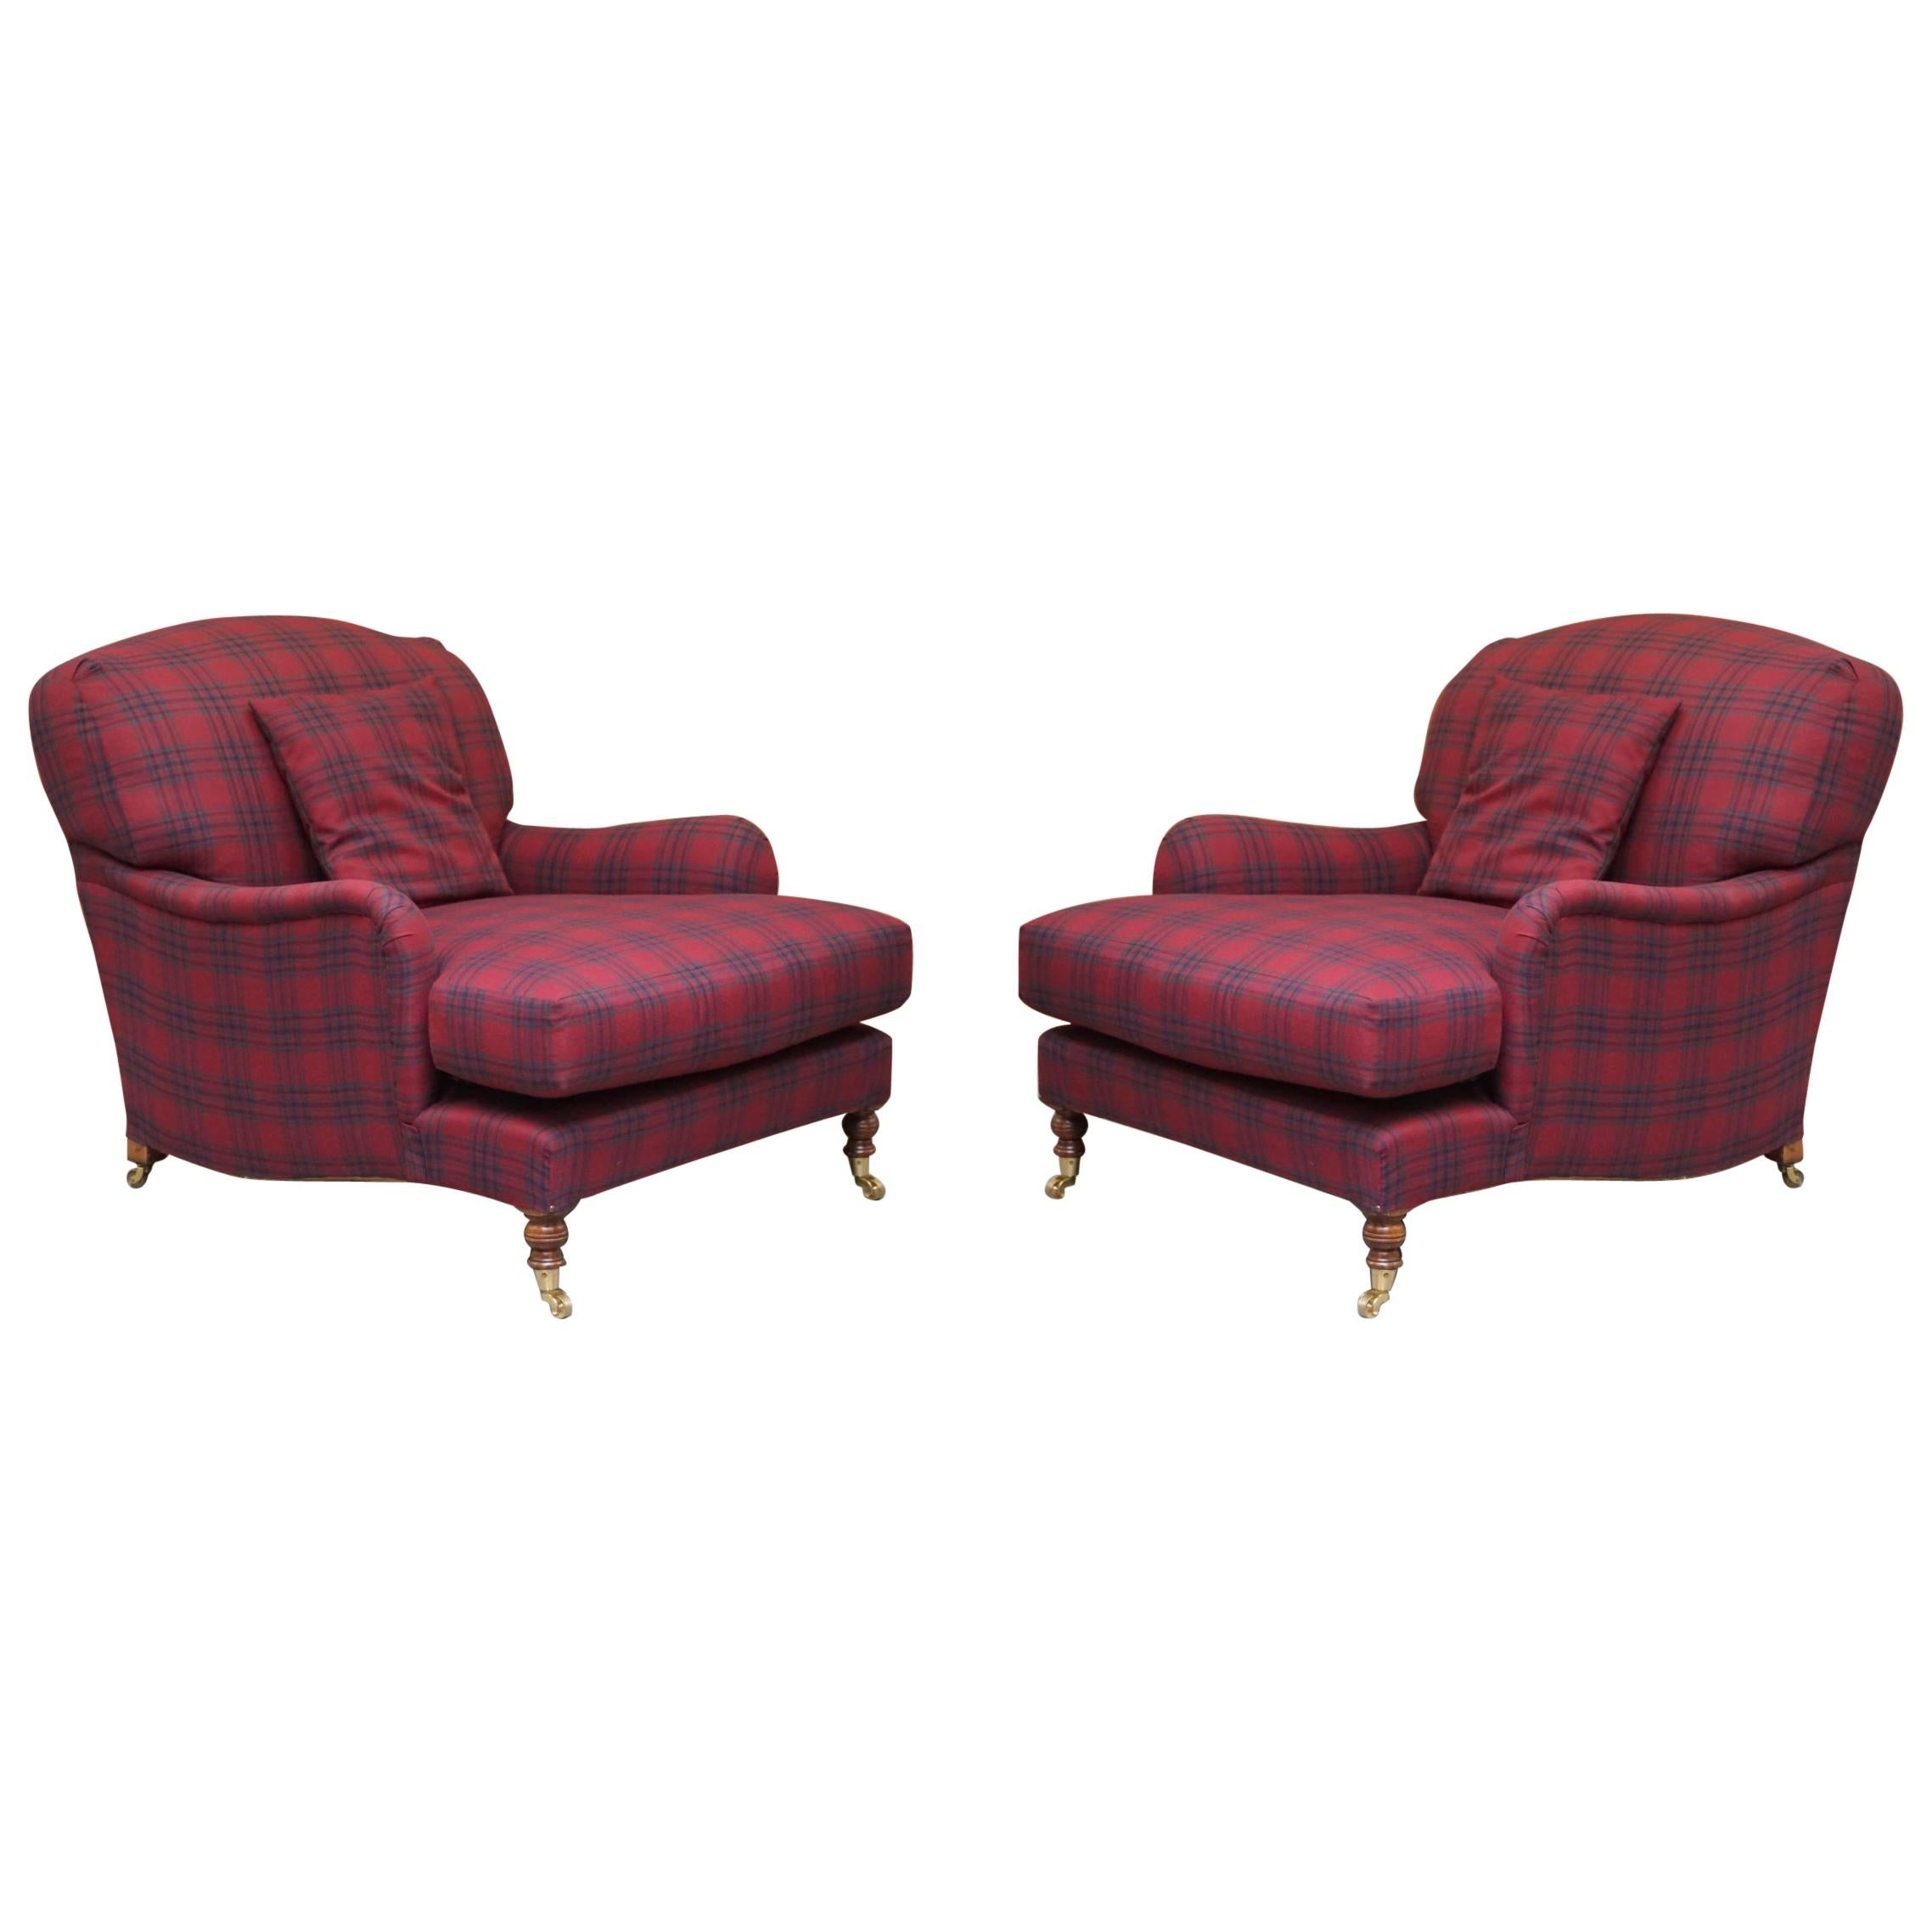 Pair of George Smith Signature Scroll Arm Howard Club Armchairs